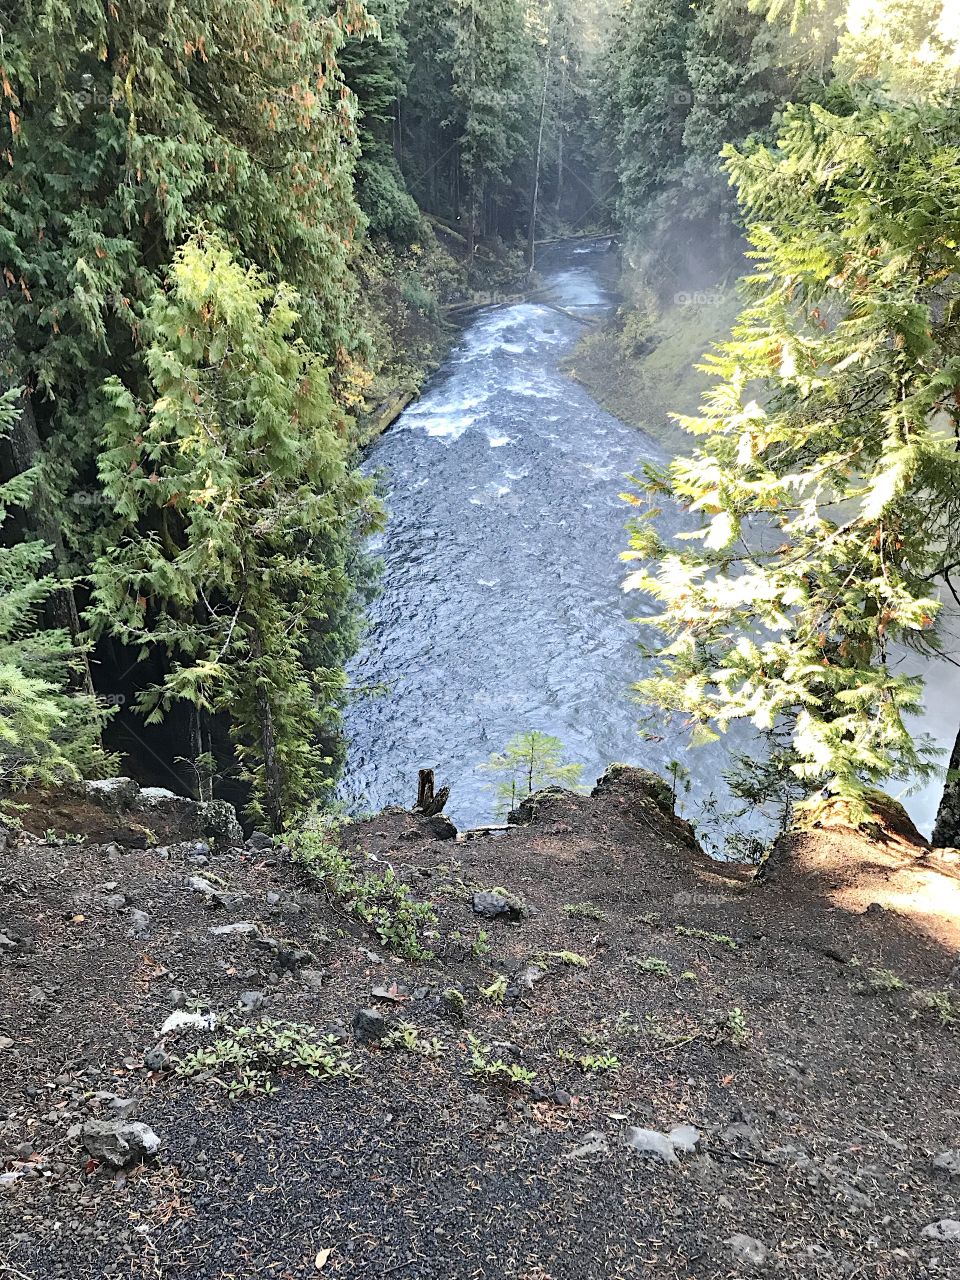 A view of the rushing waters of the McKenzie River in the mountains of Western Oregon close after its drop over Sahalie Falls on a sunny fall day. 